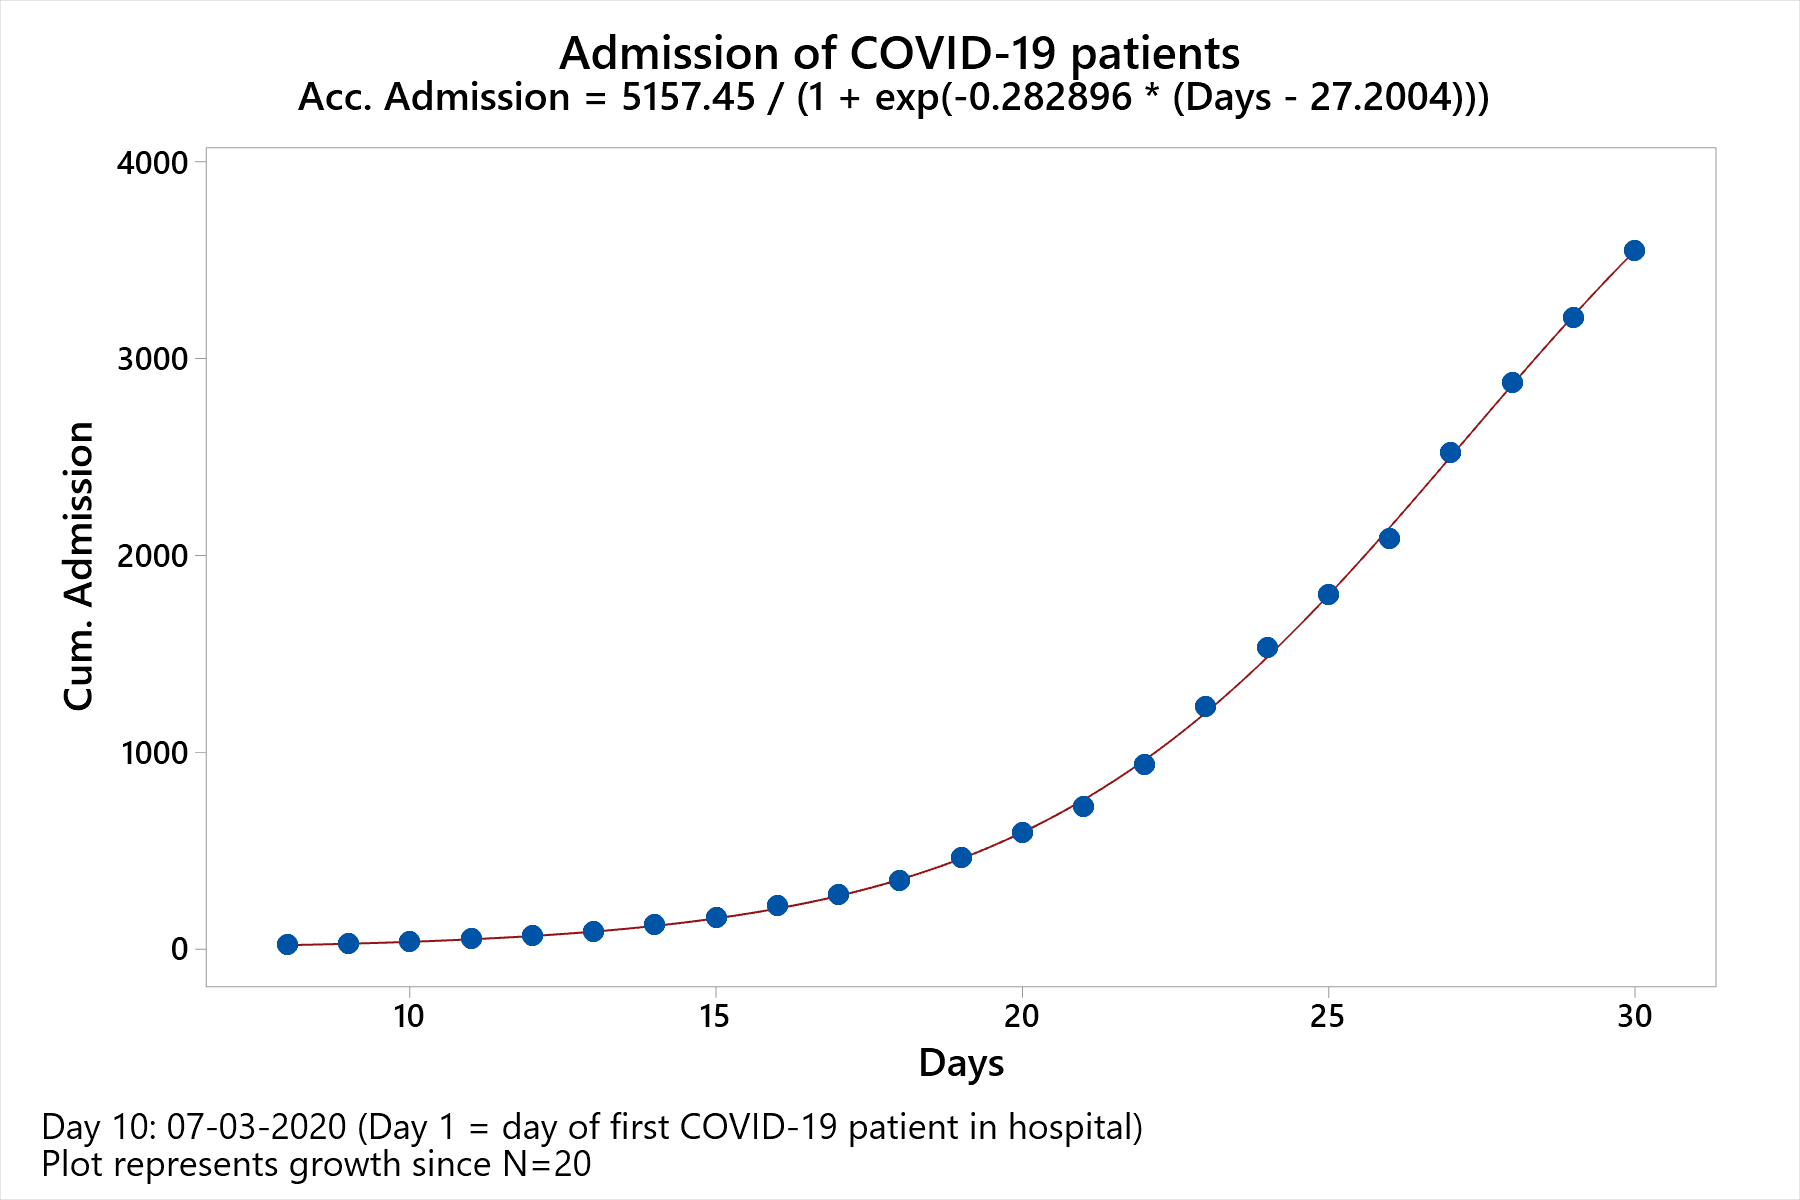 Logistic growth curve fit of patient admissions in Netherlands.